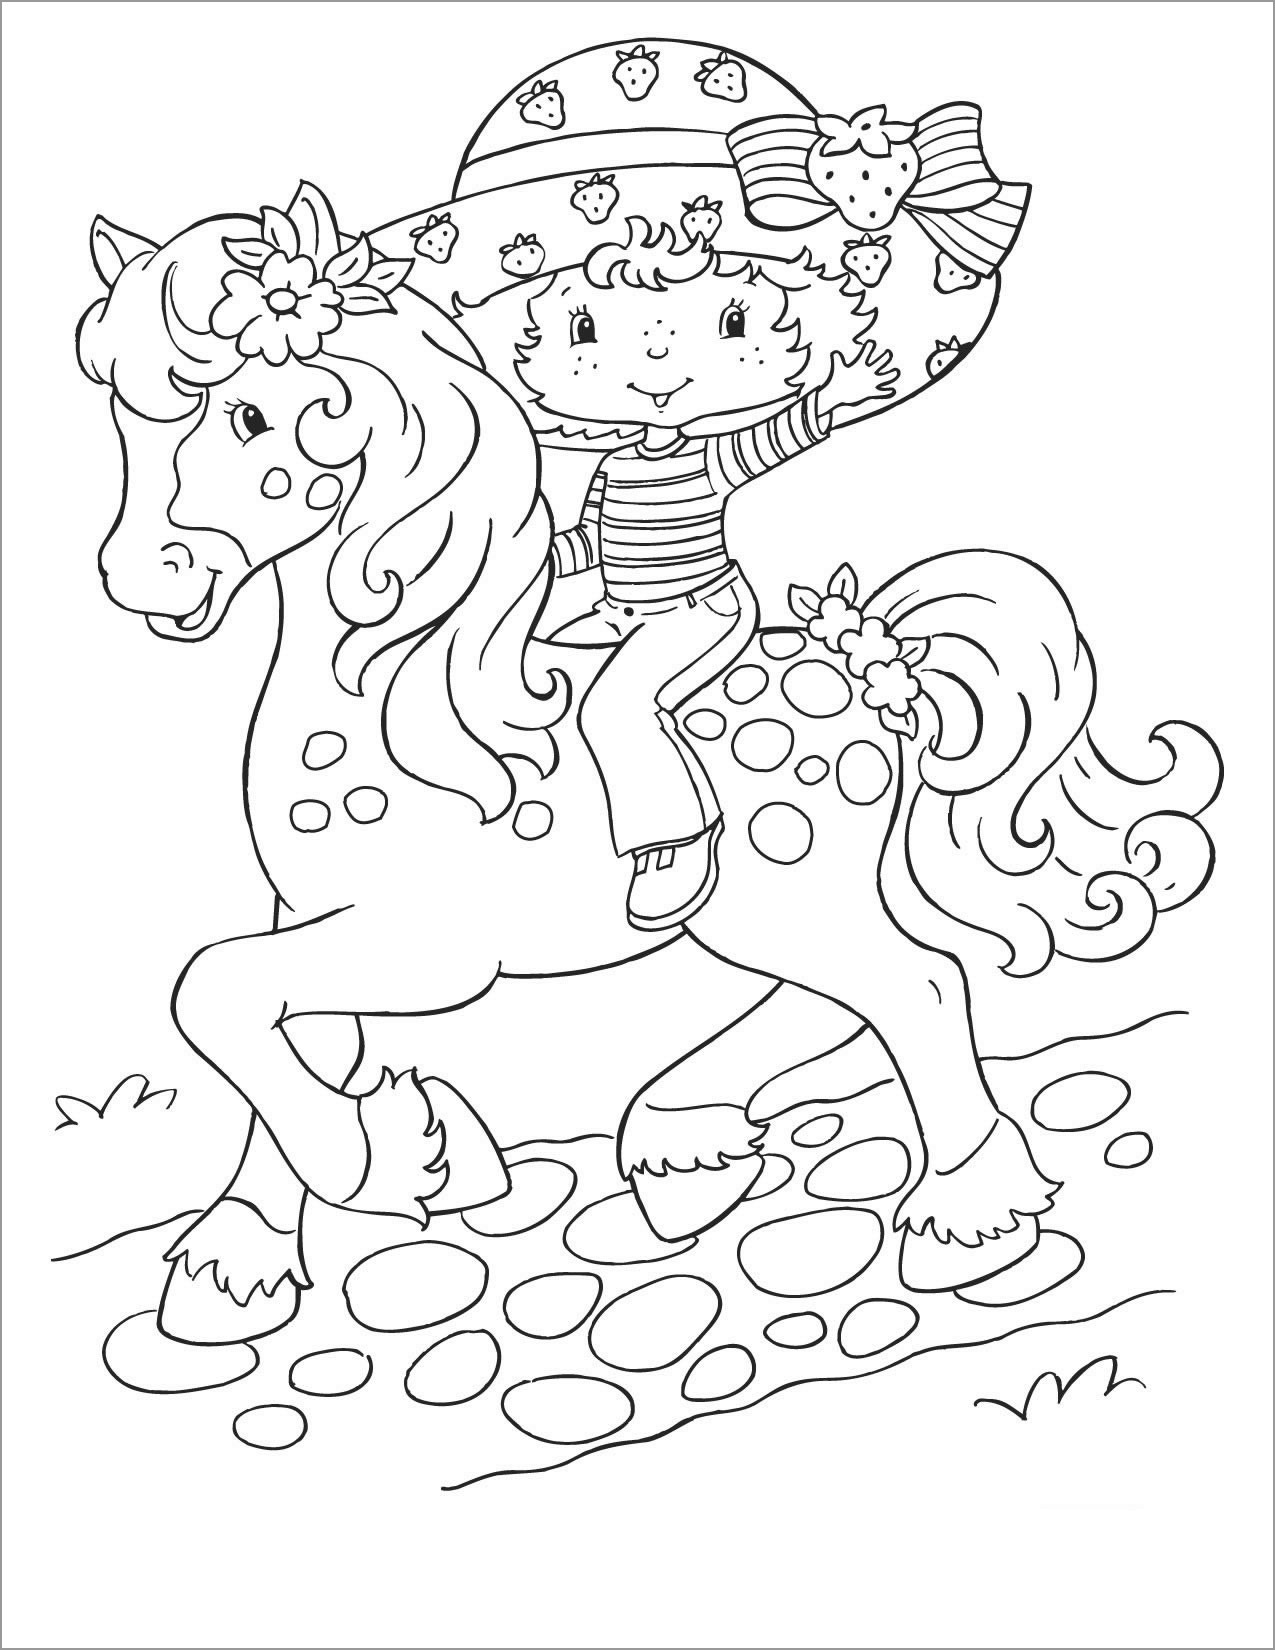 Old Strawberry Shortcake Ride Horse Coloring Pages